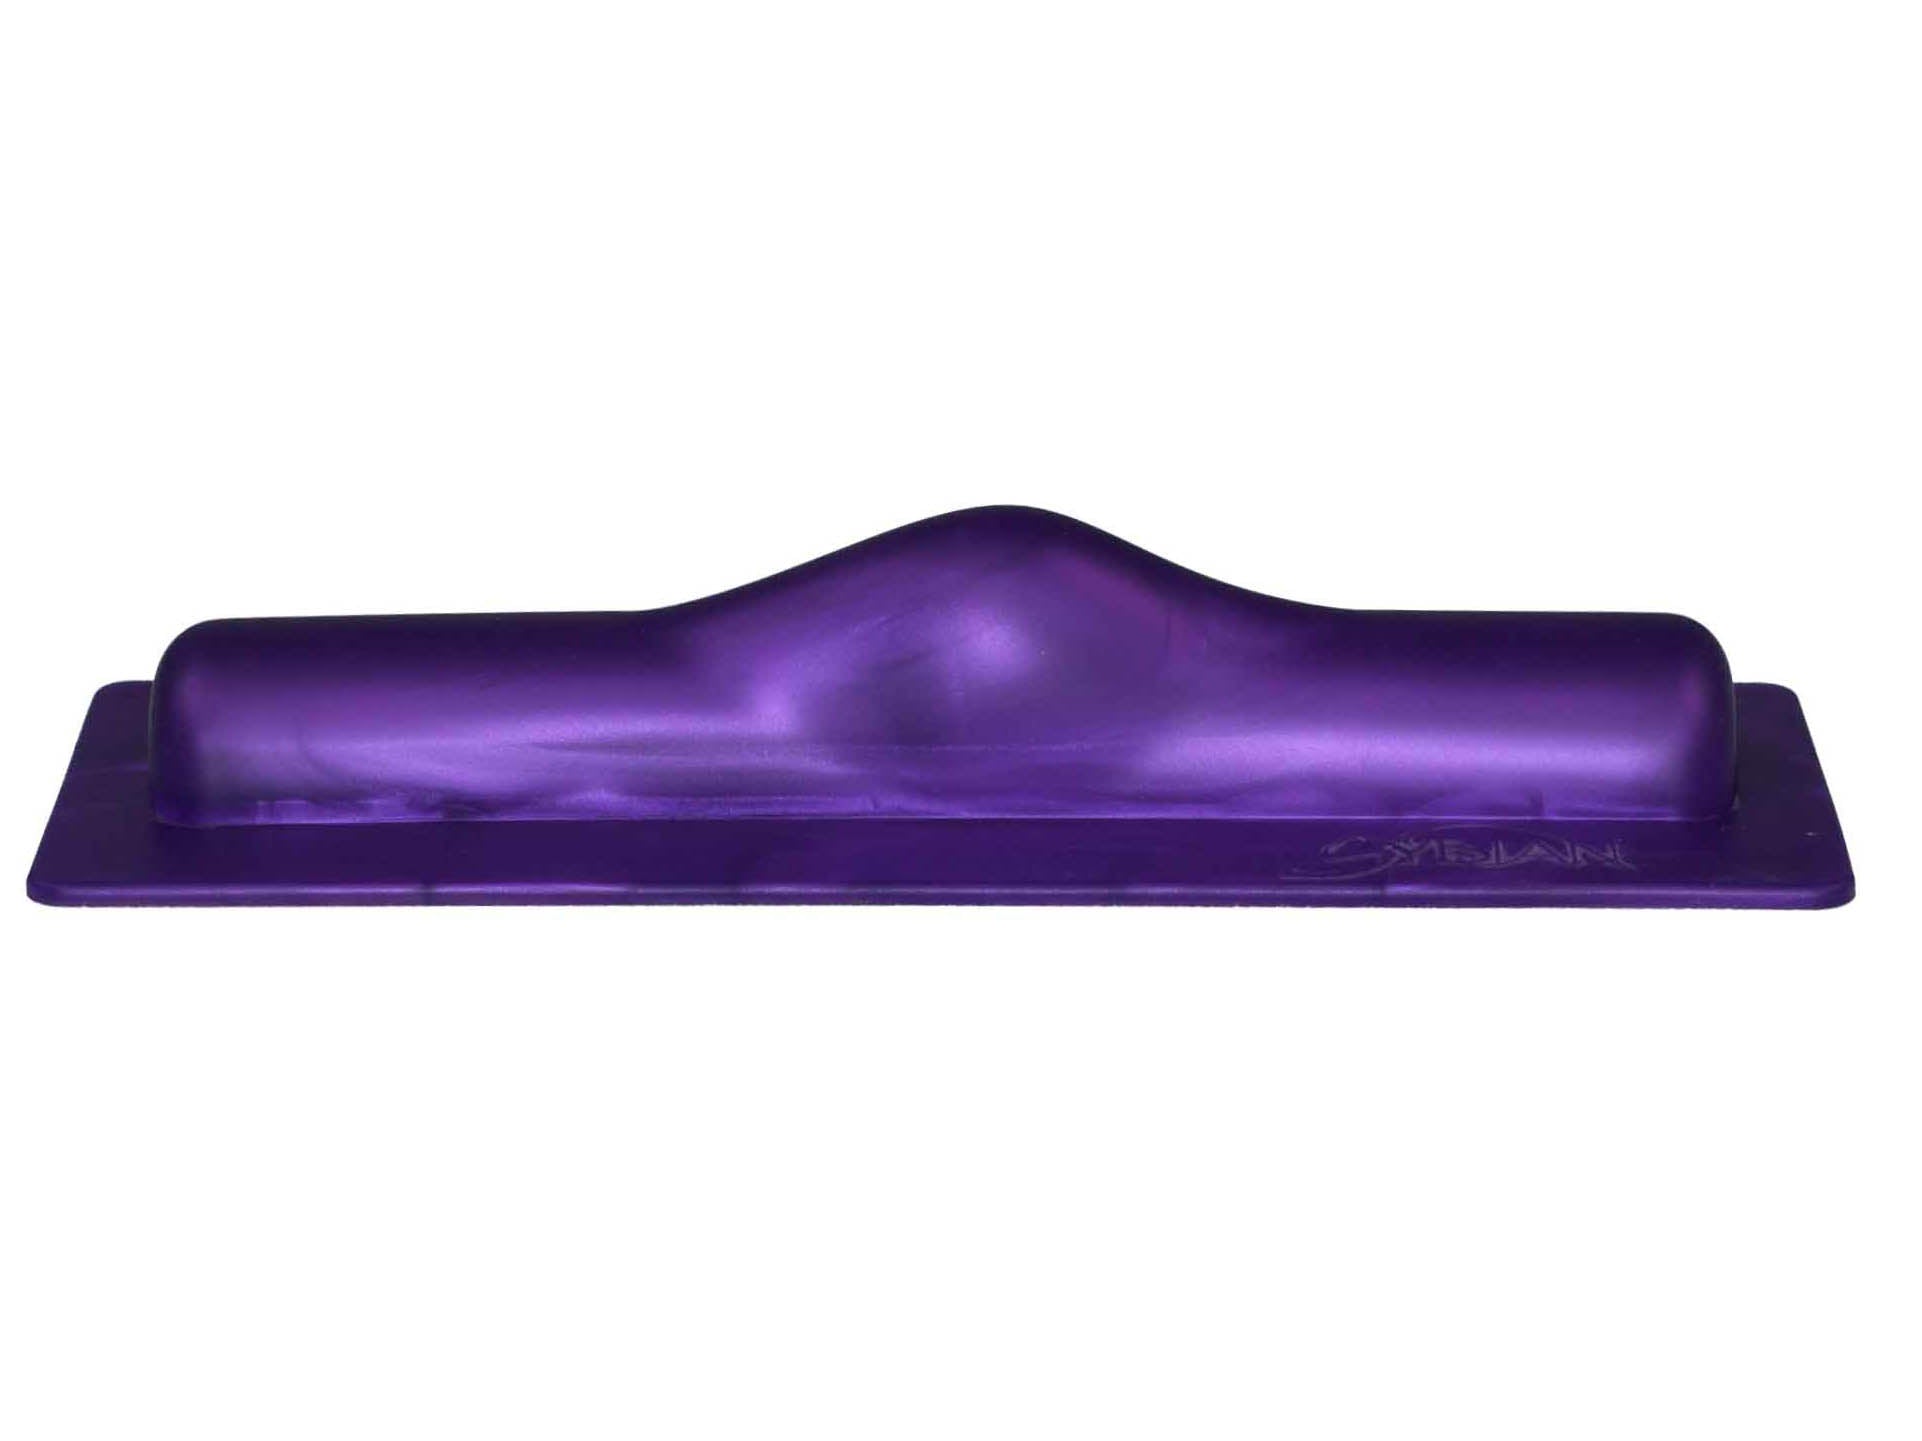 The purple flat top Sybian Attachment.